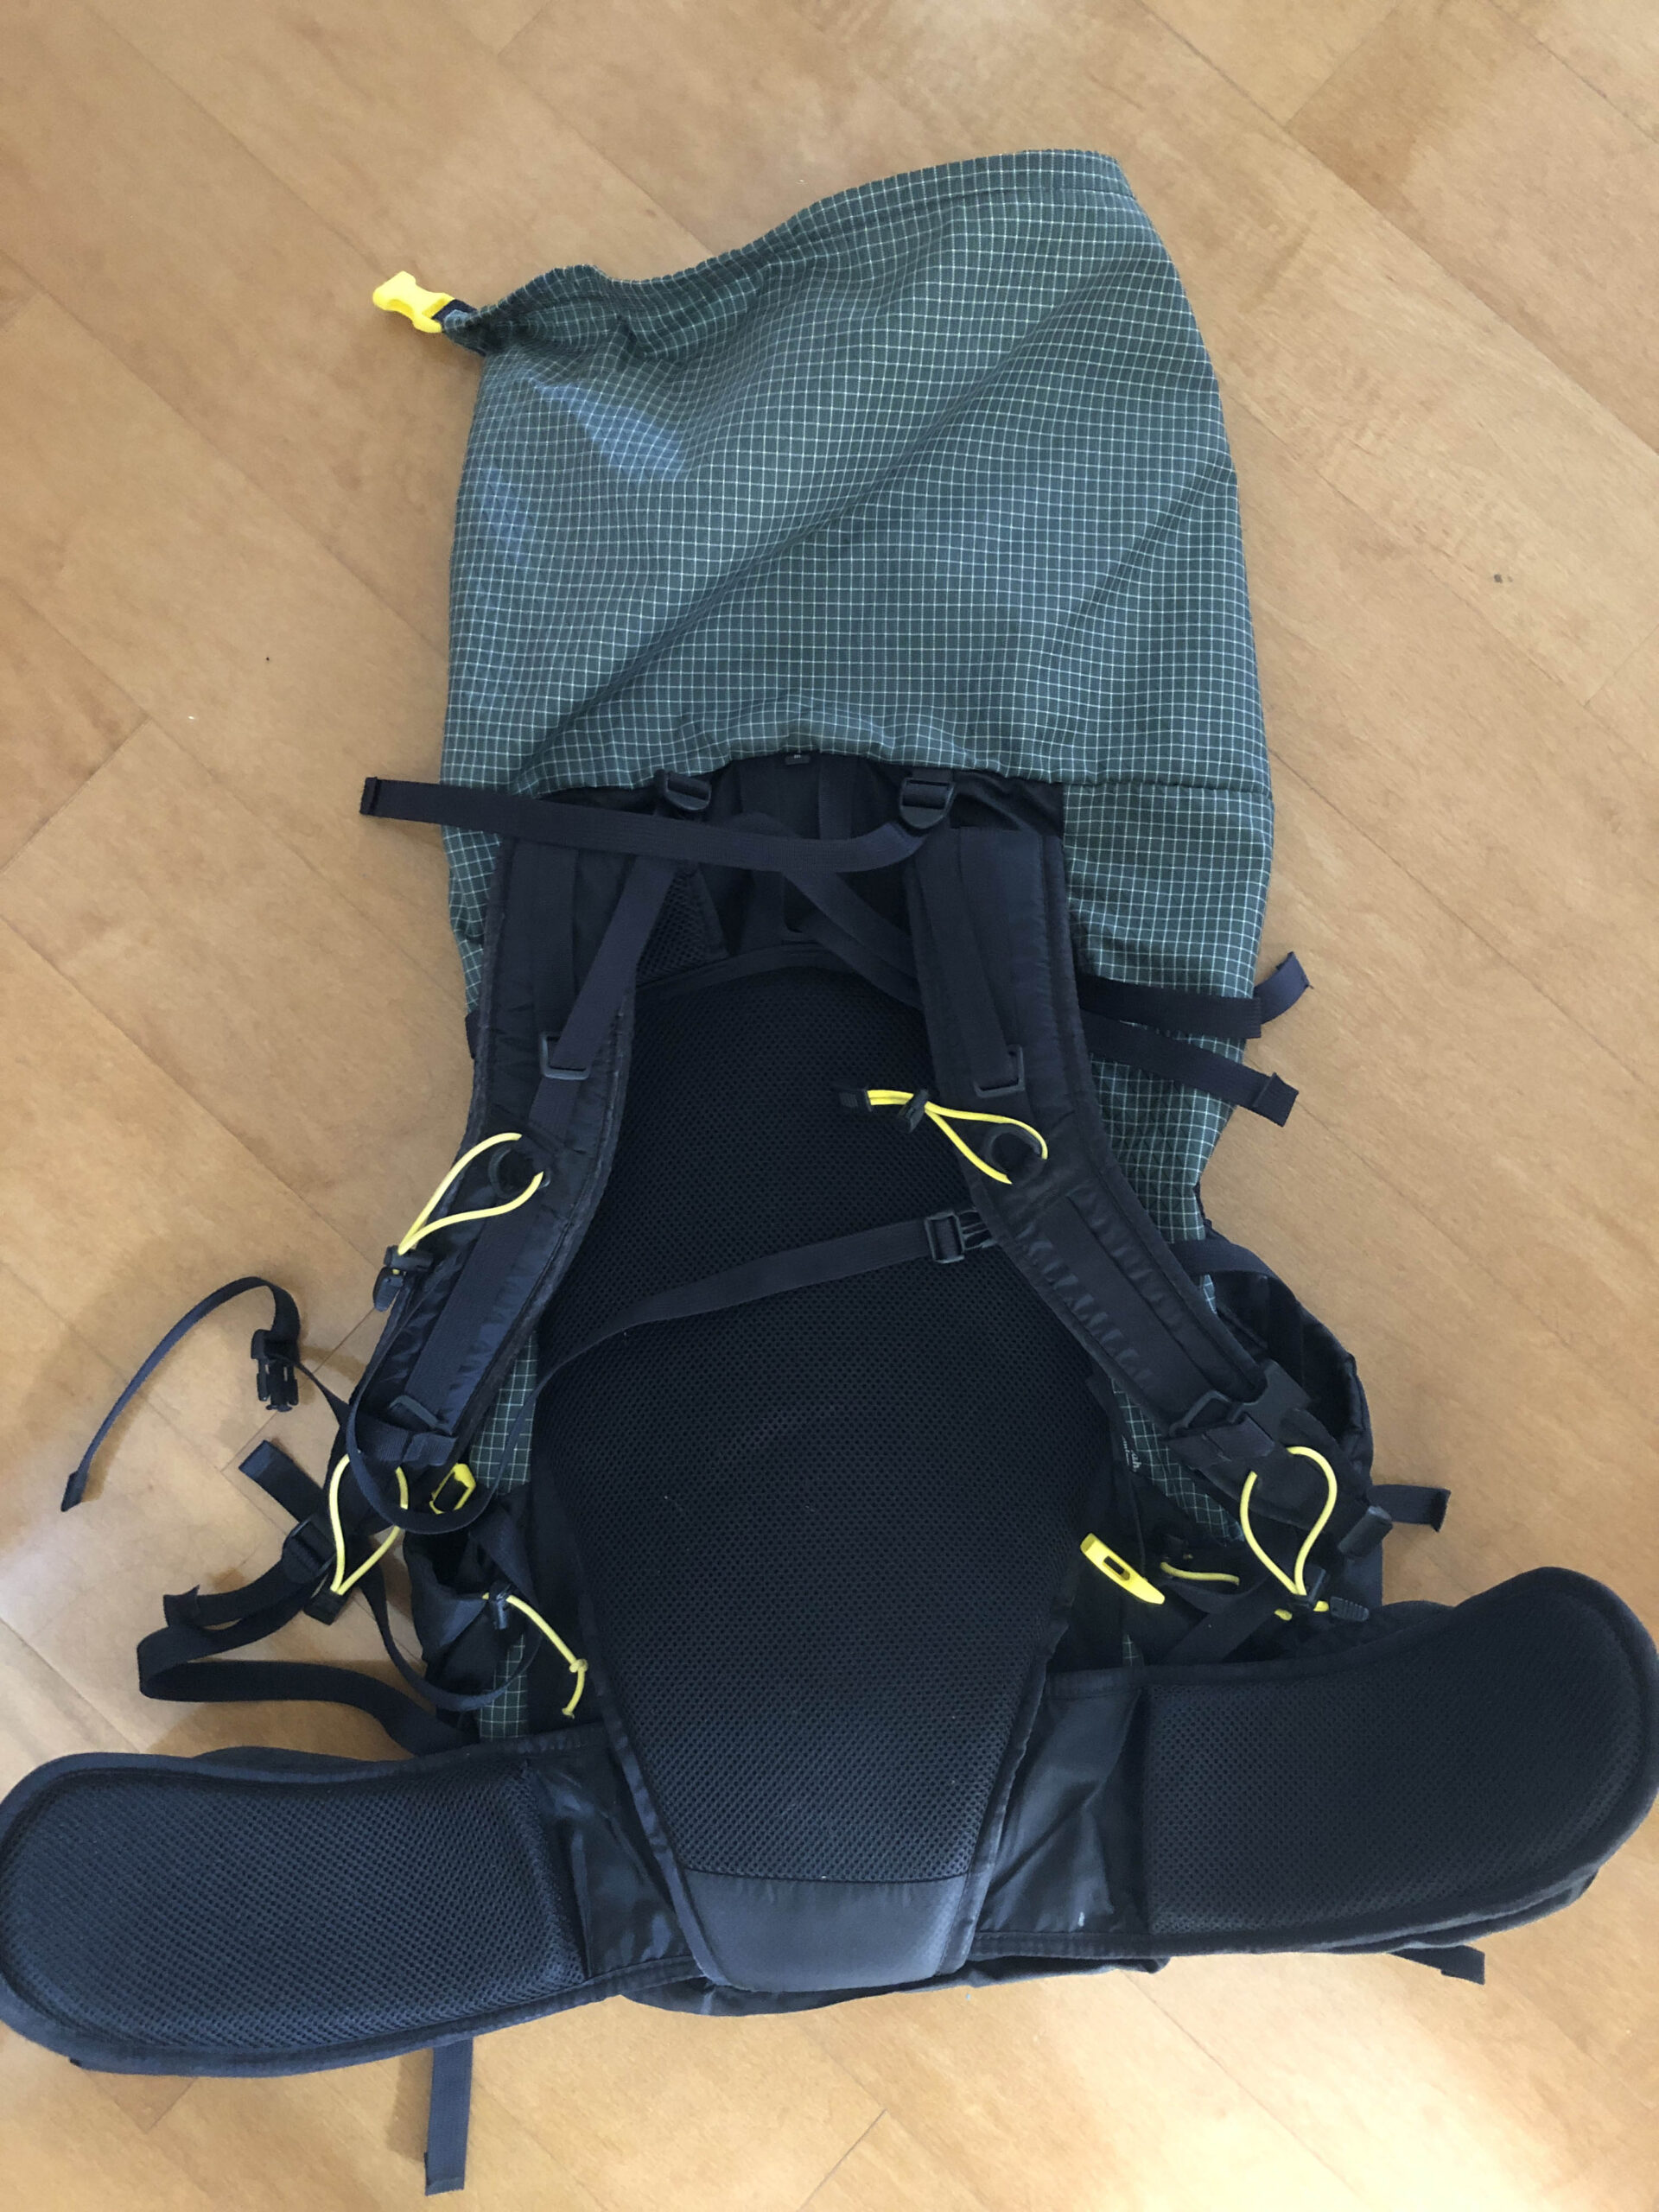 ULA Circuit For Sale - Backpacking Light